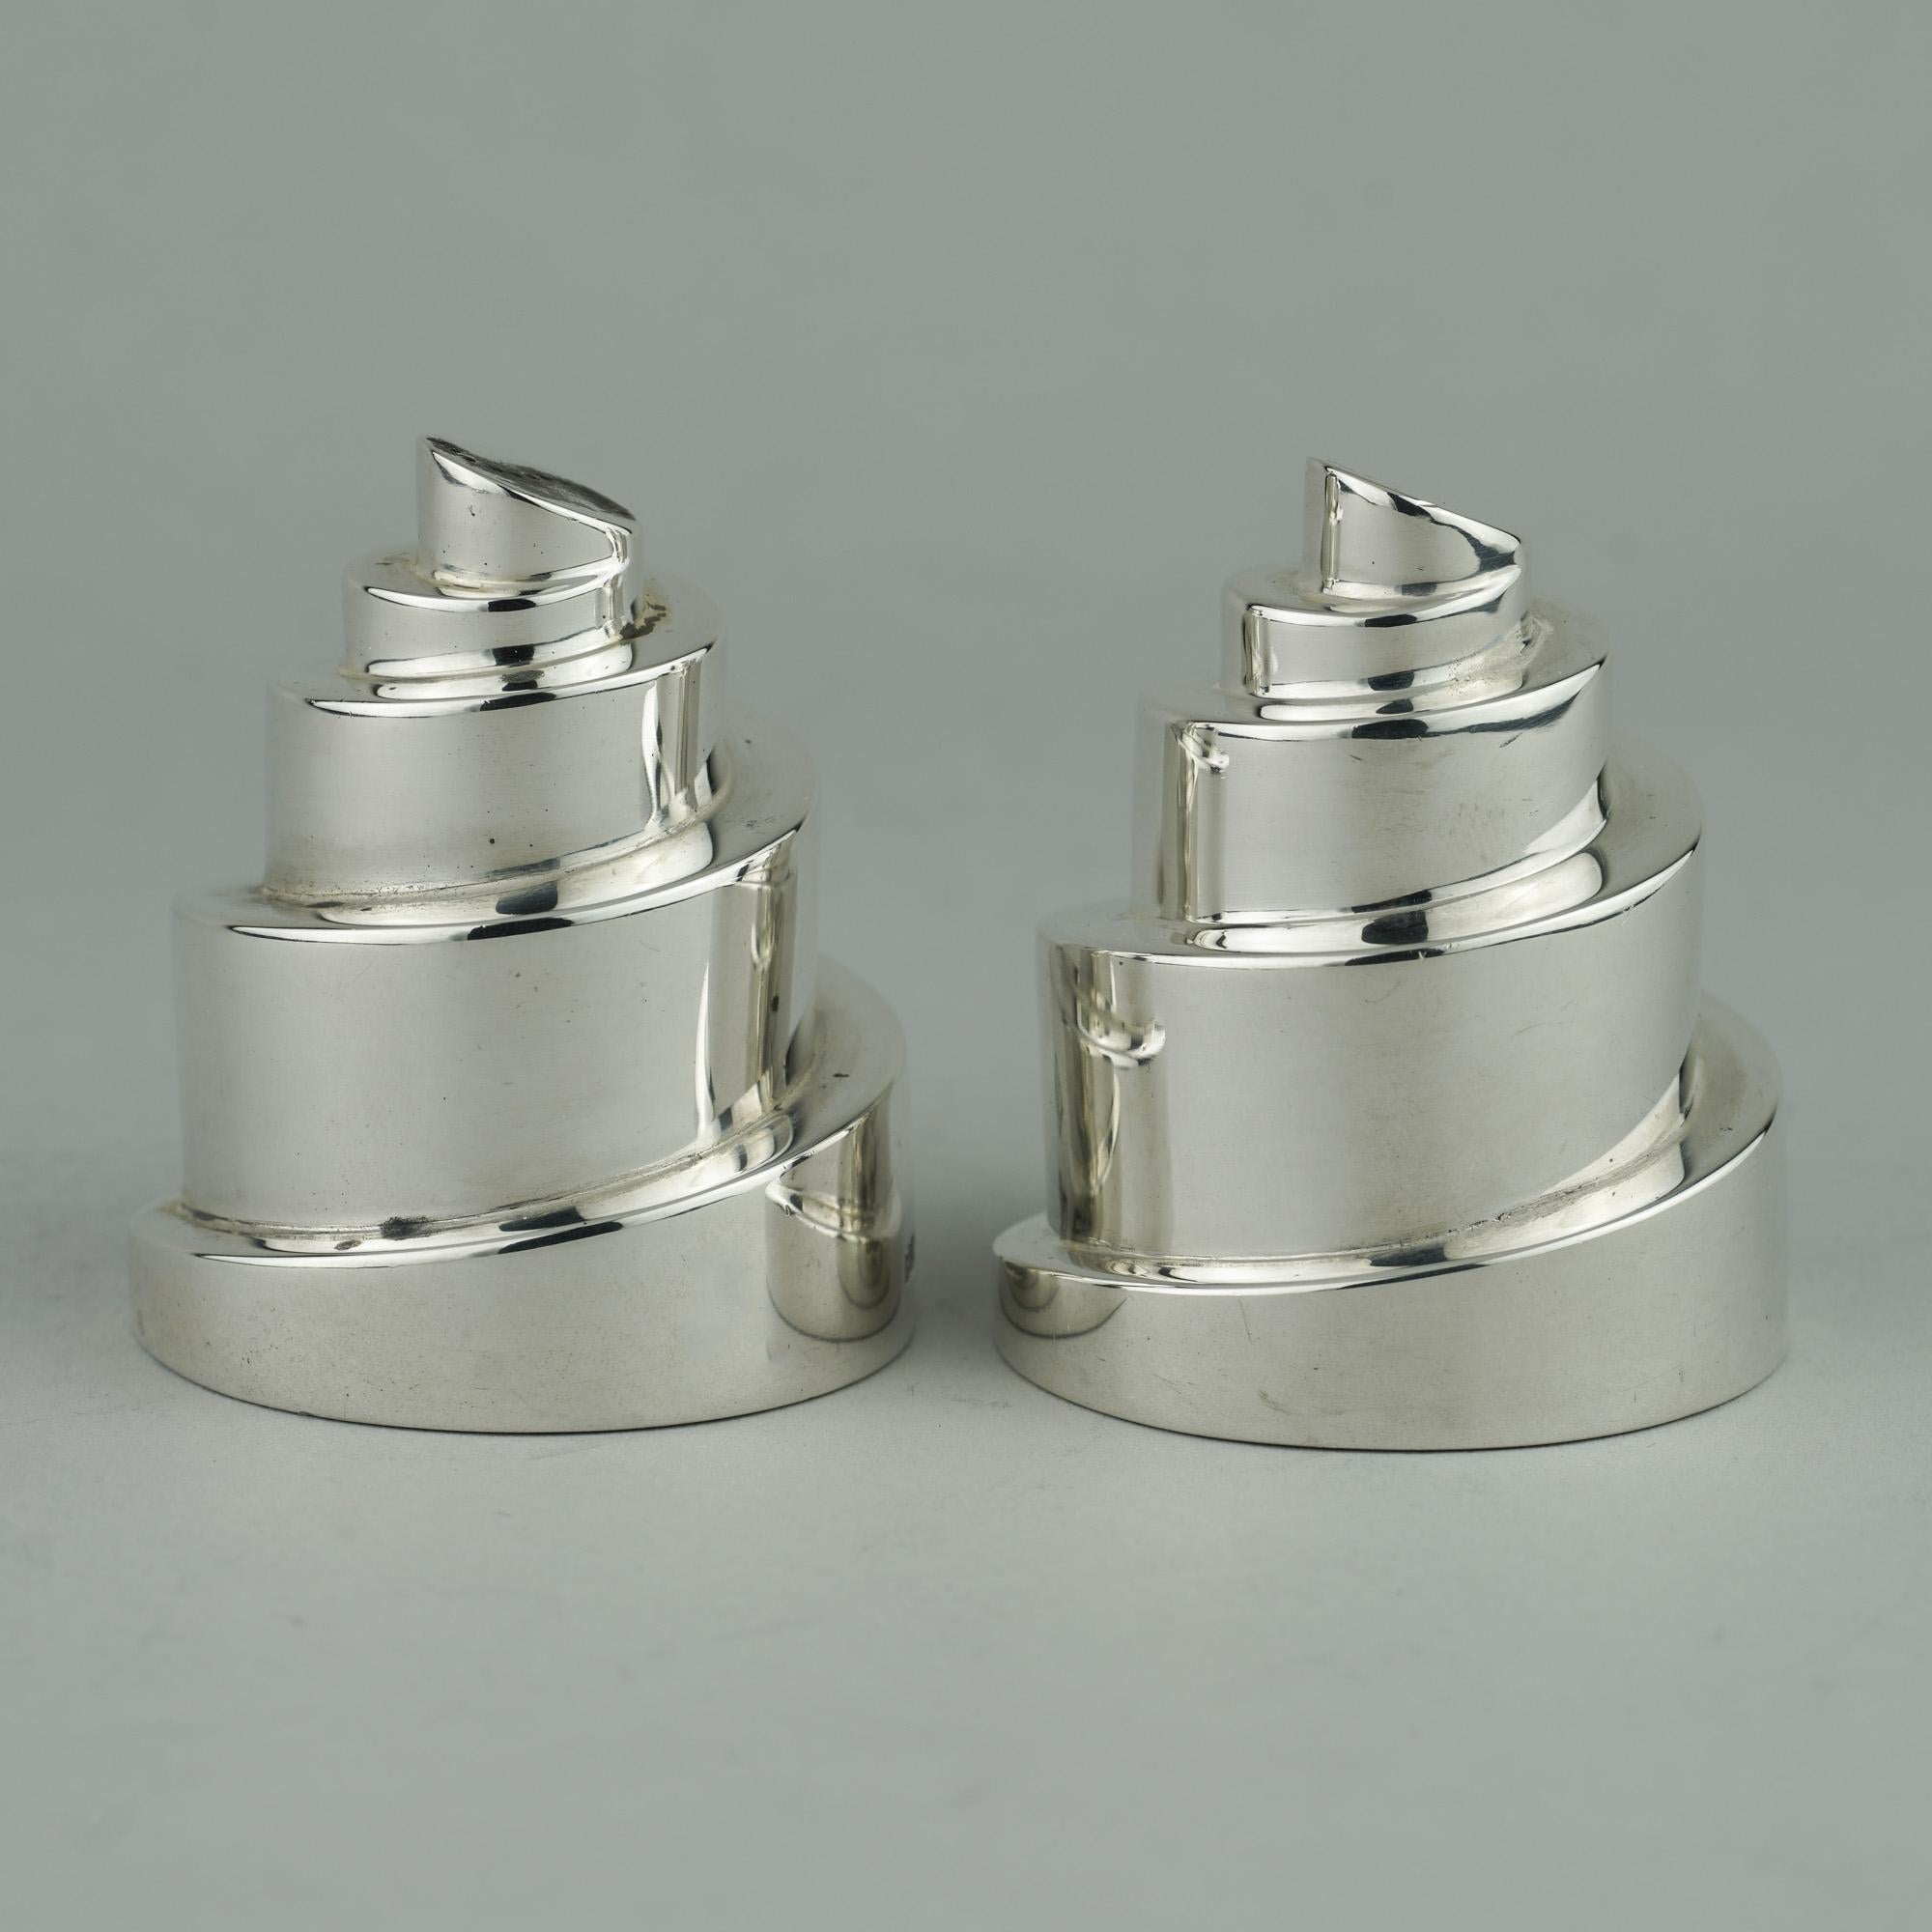 Sterling silver pair of salt & pepper shakers in a form of a Helter Skelter, made by Boodle & Dunthorne.
The tops pierced with 'S' and 'P'. 
Made in England, London, 2001
Fully hallmarked. 

Approx. dimensions: 
diameter x height: 4.6 x 5.5 cm